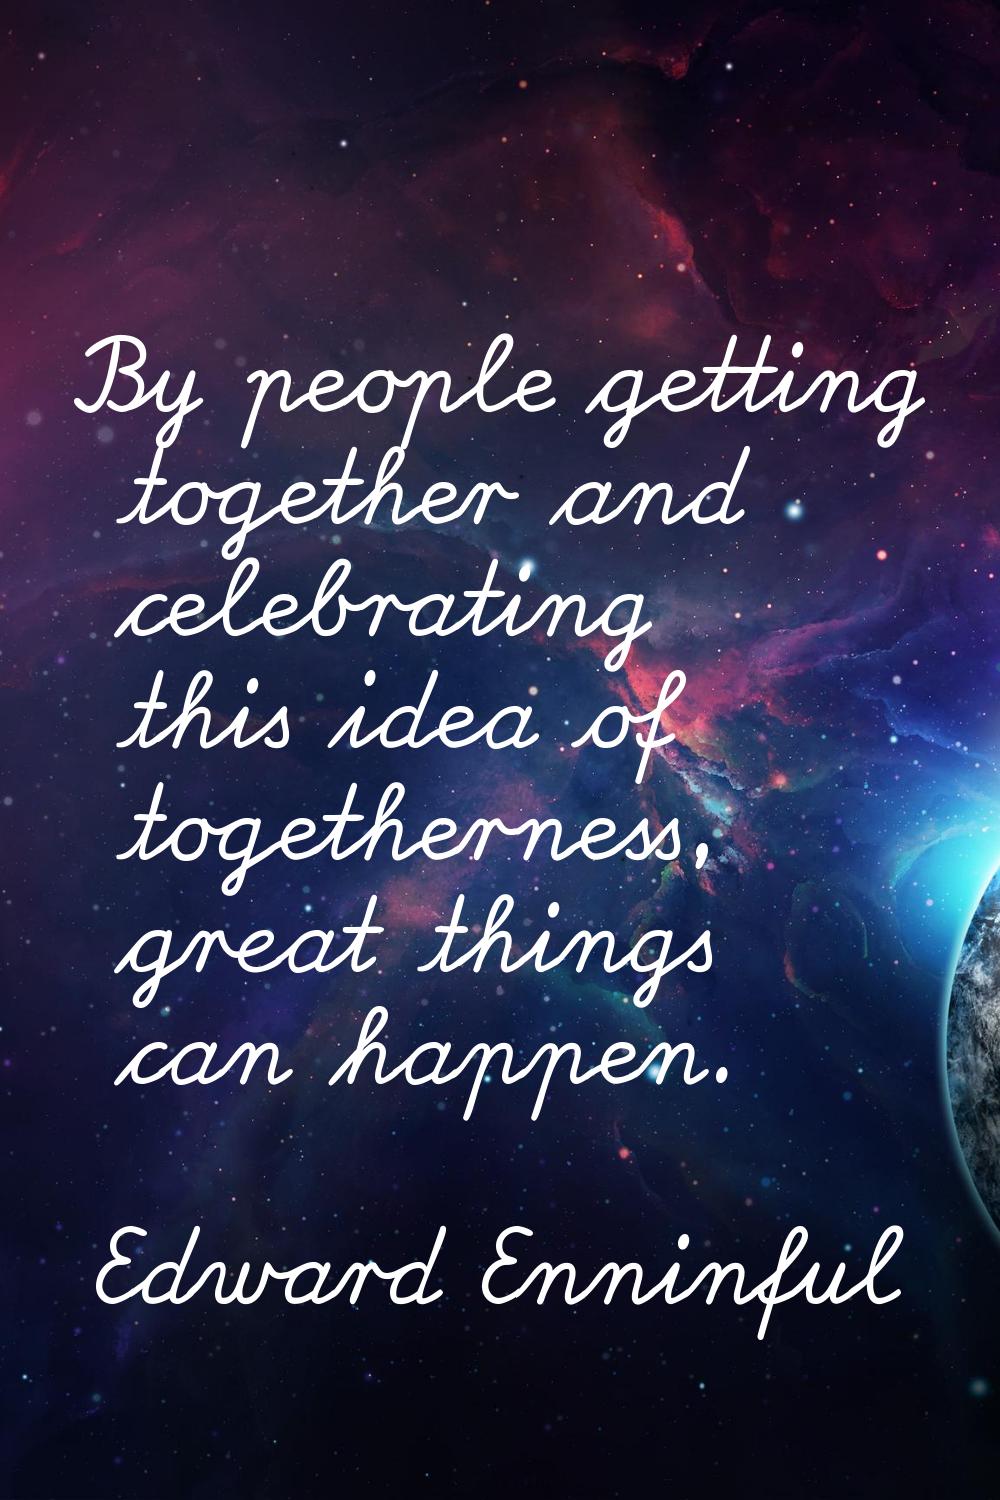 By people getting together and celebrating this idea of togetherness, great things can happen.